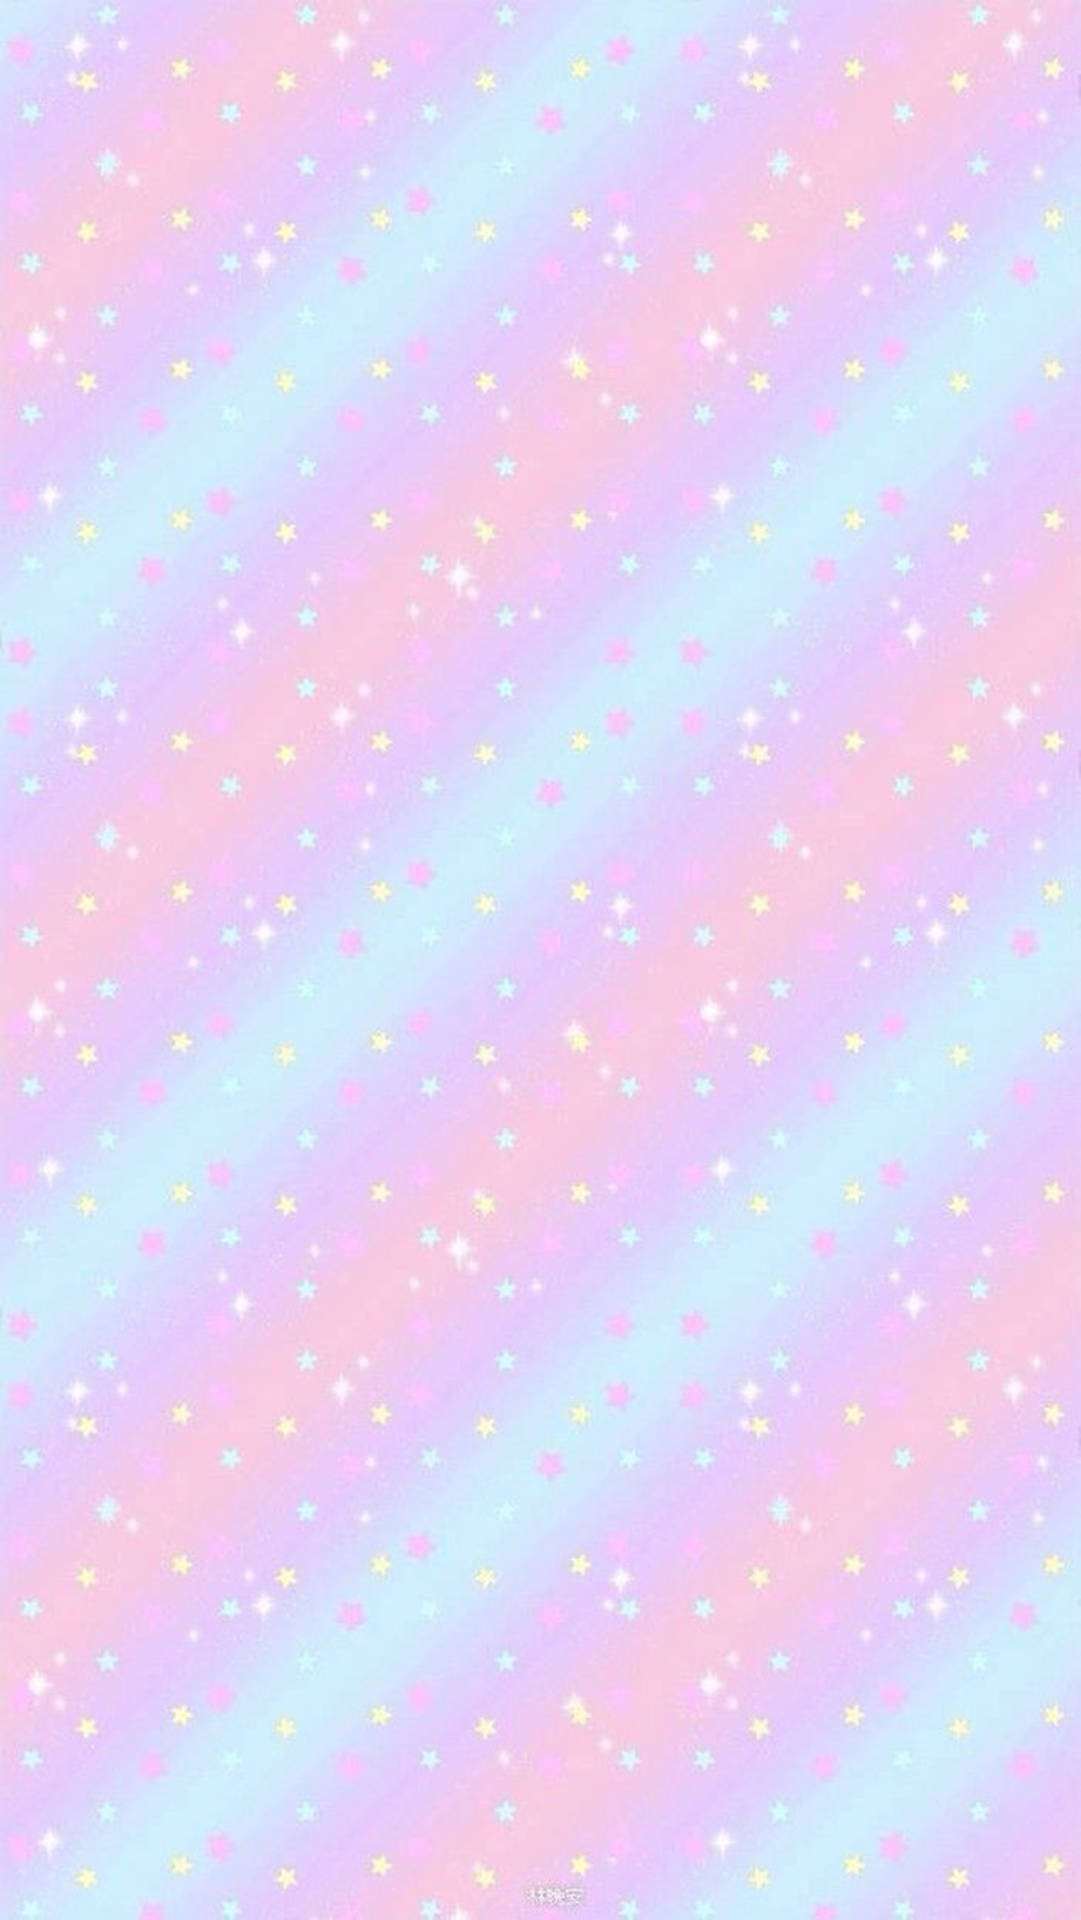 Whimsical Diagonal Pattern In Cute Pastel Colors Background